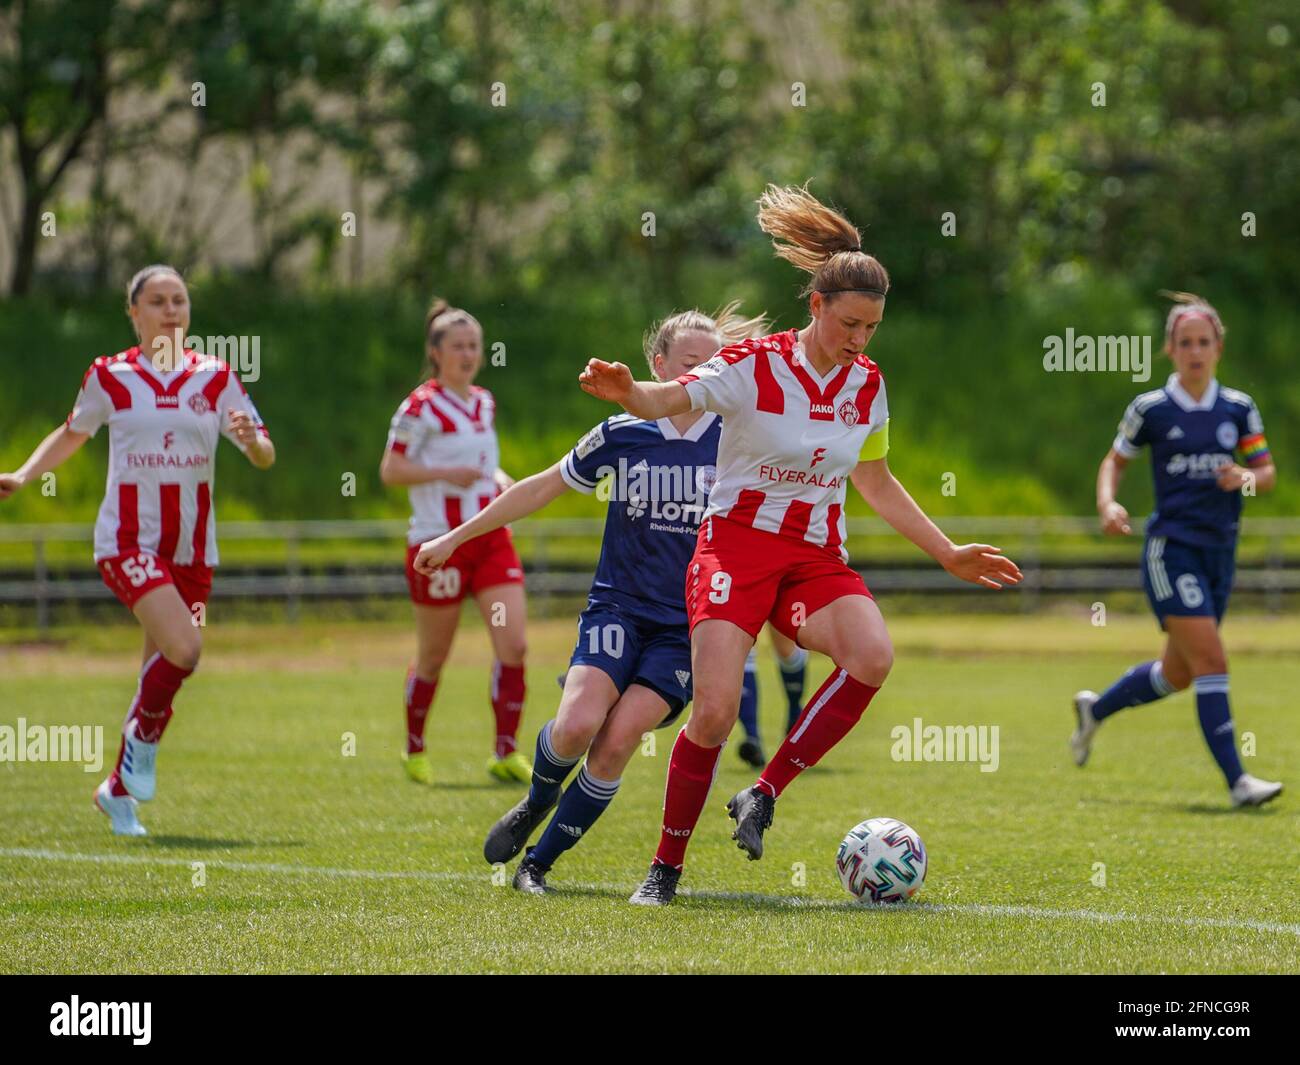 Andernach, Germany. 16th May, 2021. Luisa Scheidel (9 FC Wuerzburger Kickers)  controlls the ball during the 2. Womens Bundesliga match between SG 99  Andernach and FC Wuerzburger Kickers at the Andernach Stadium